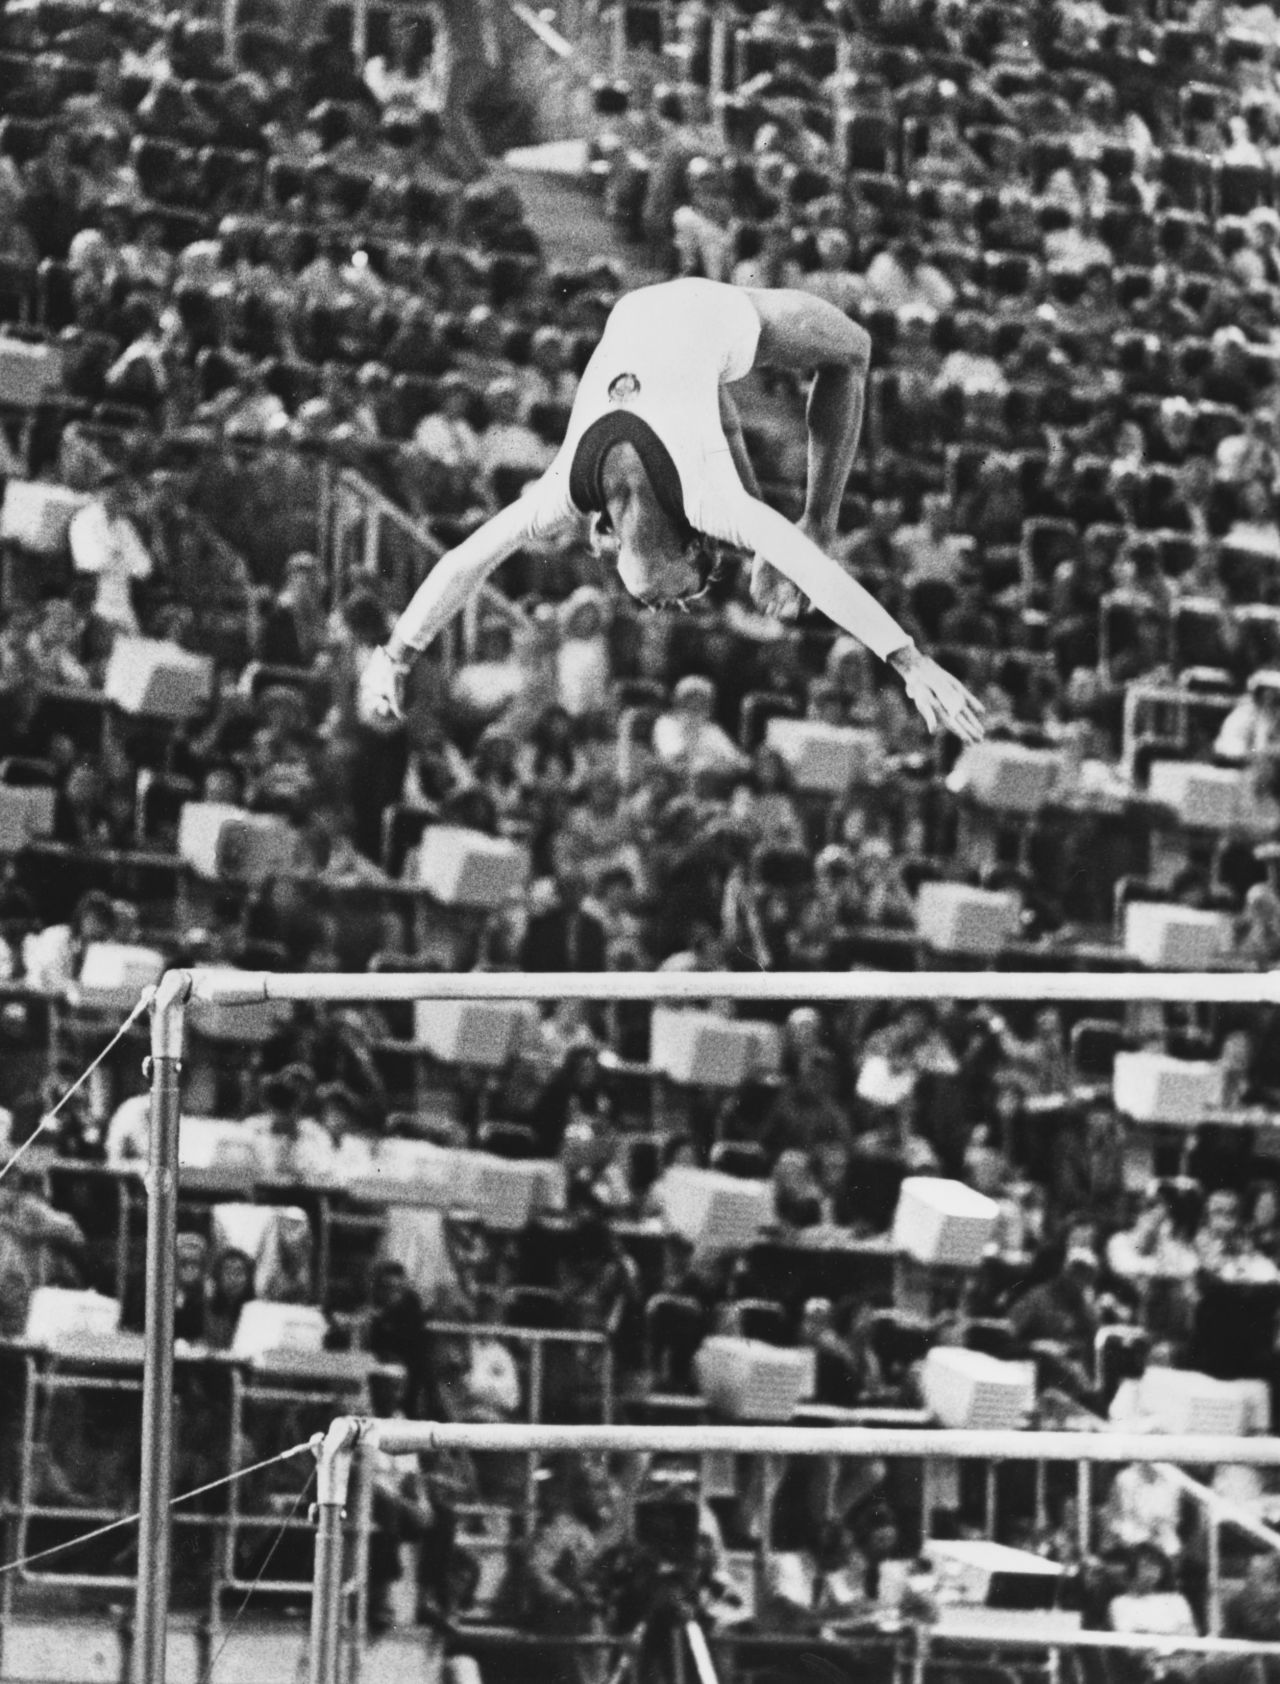 The "Korbut flip" revolutionized gymnastics, bringing an element of danger and acrobatic technique to the sport.